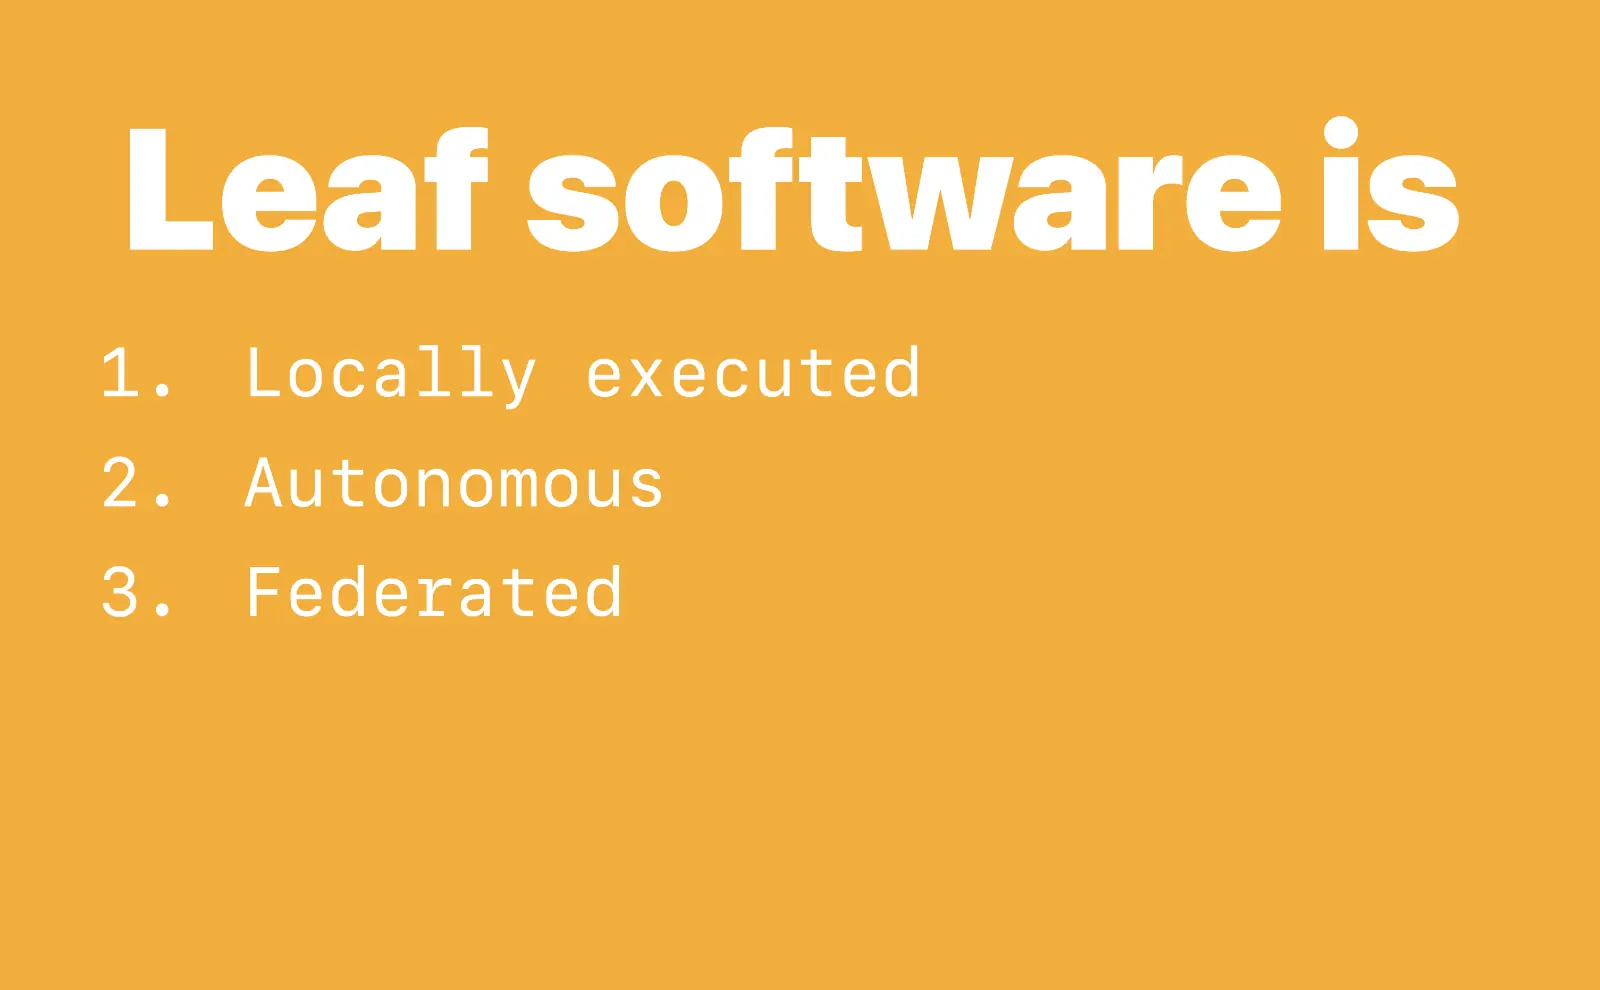 Leaf software is 1. Locally executed. 2. Autonomous. 3. Federated